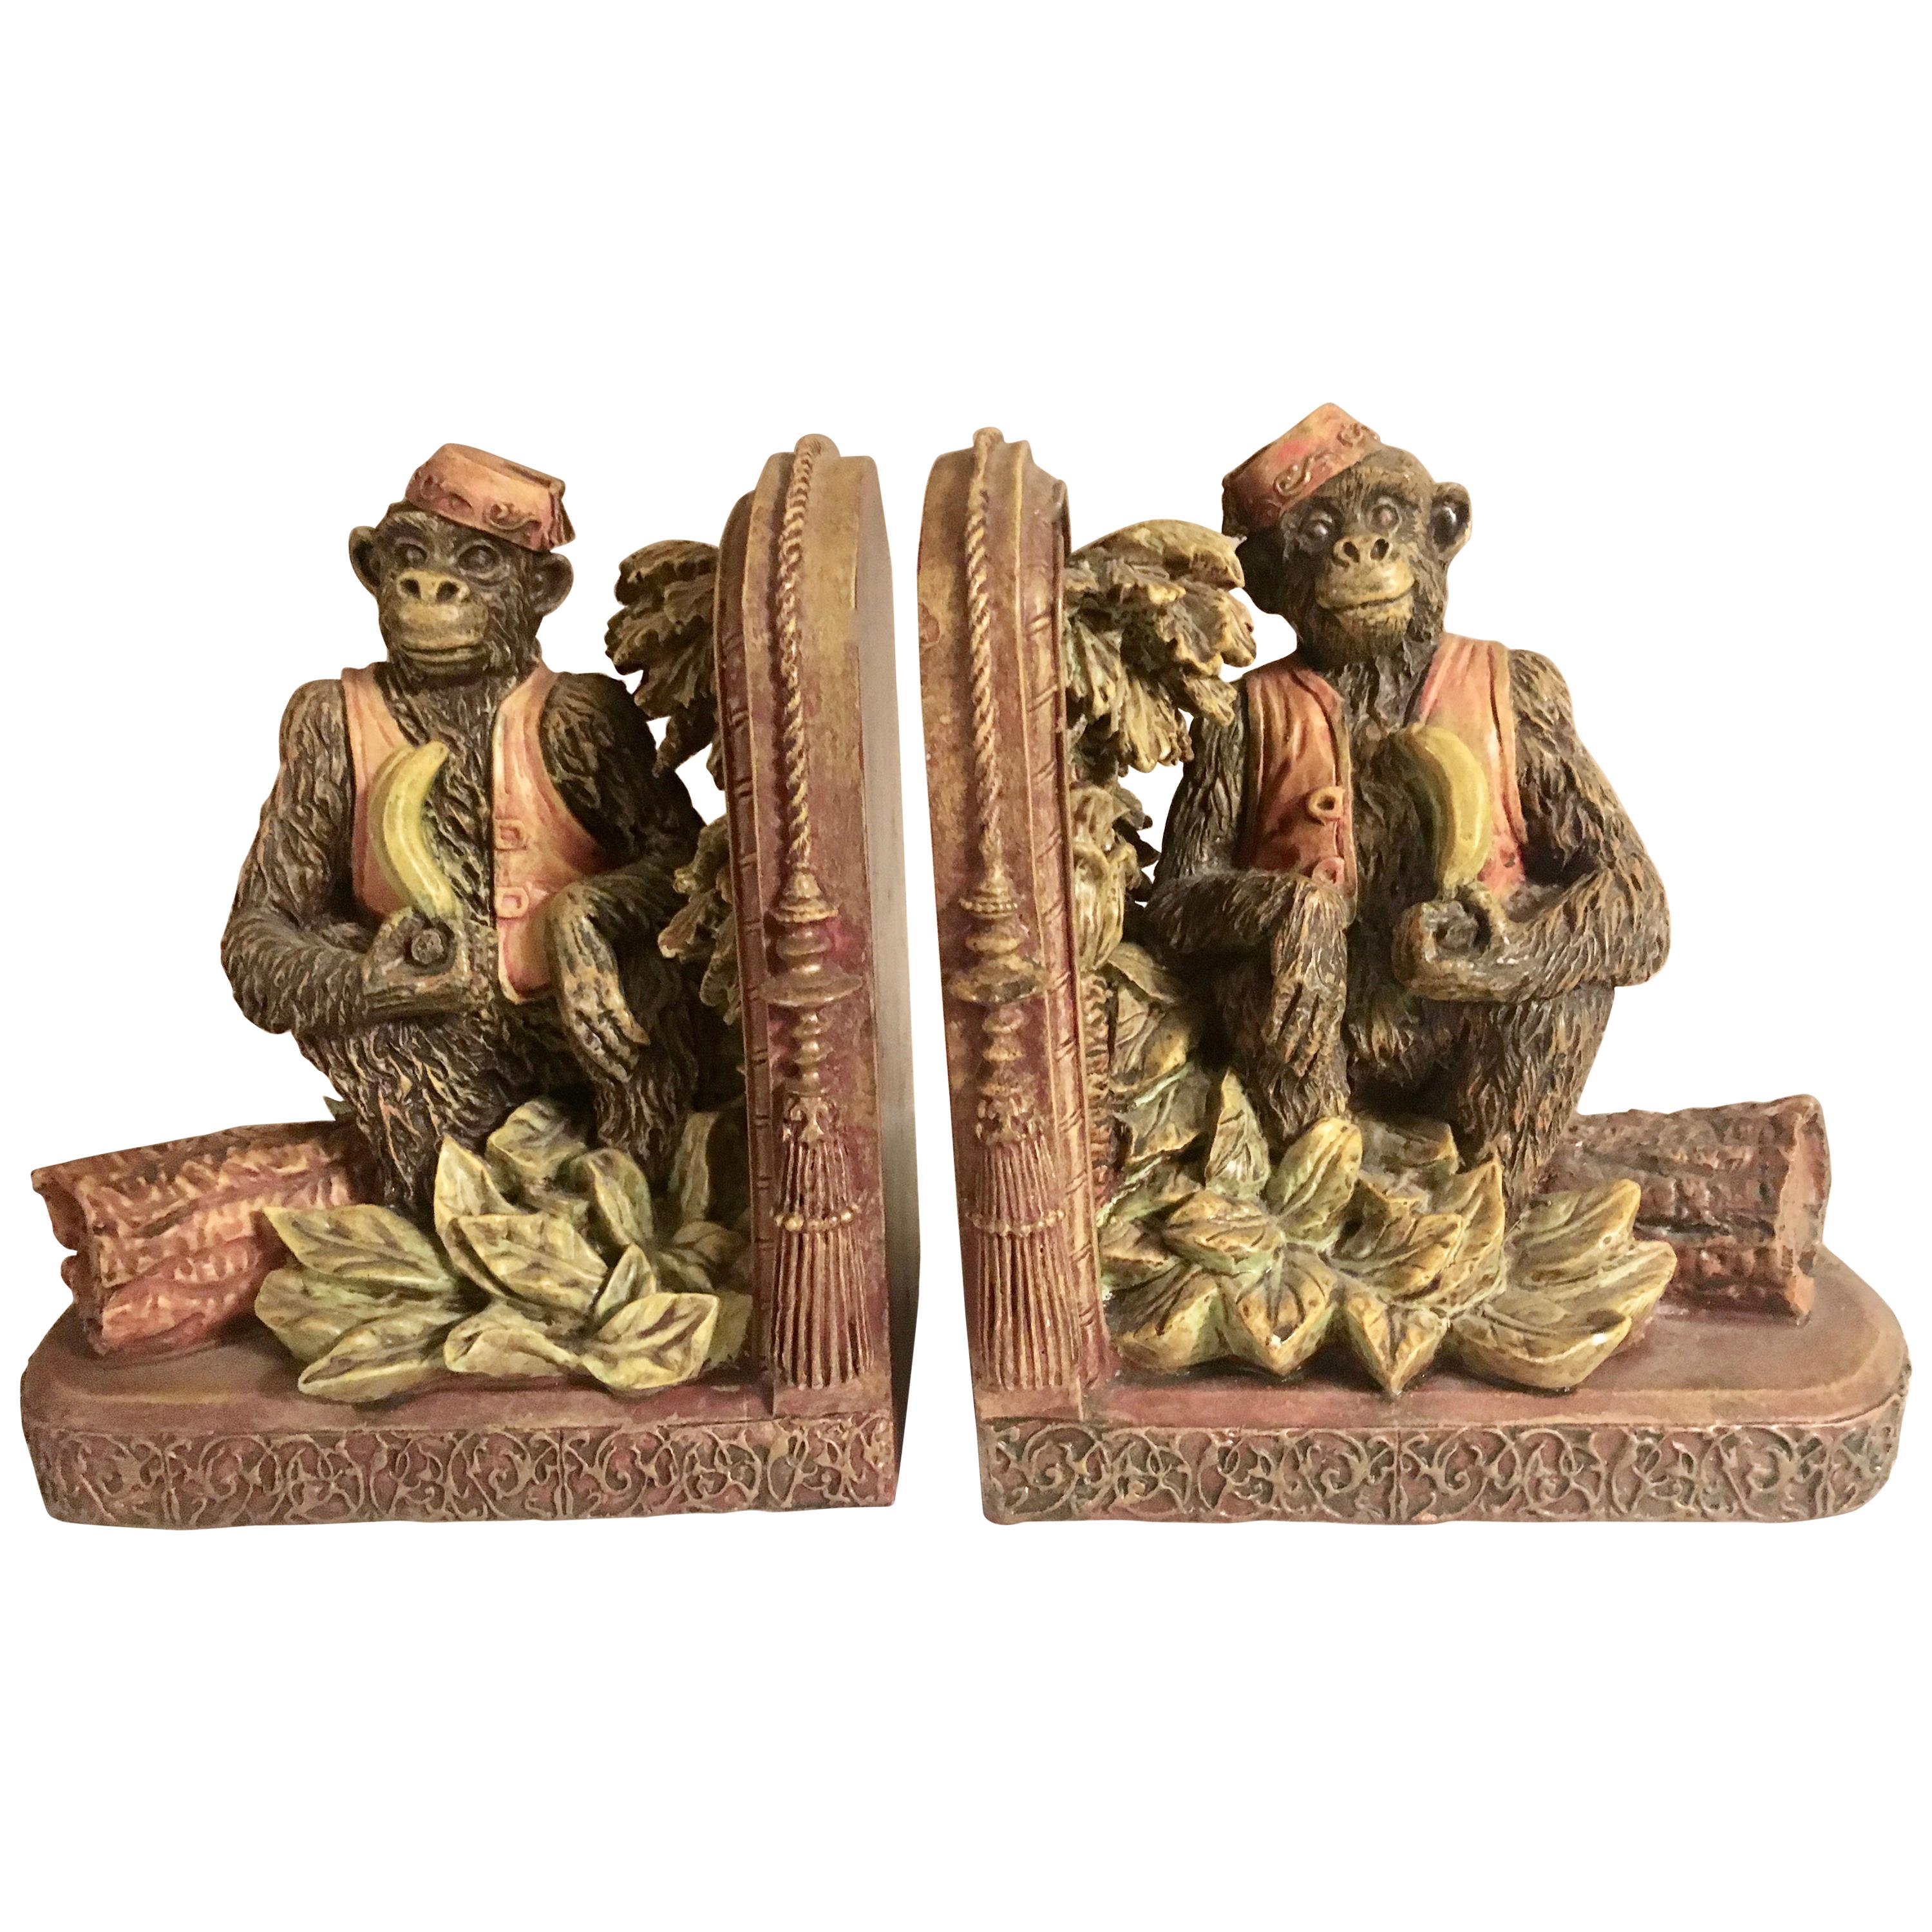 Pair of Bookends with Monkeys